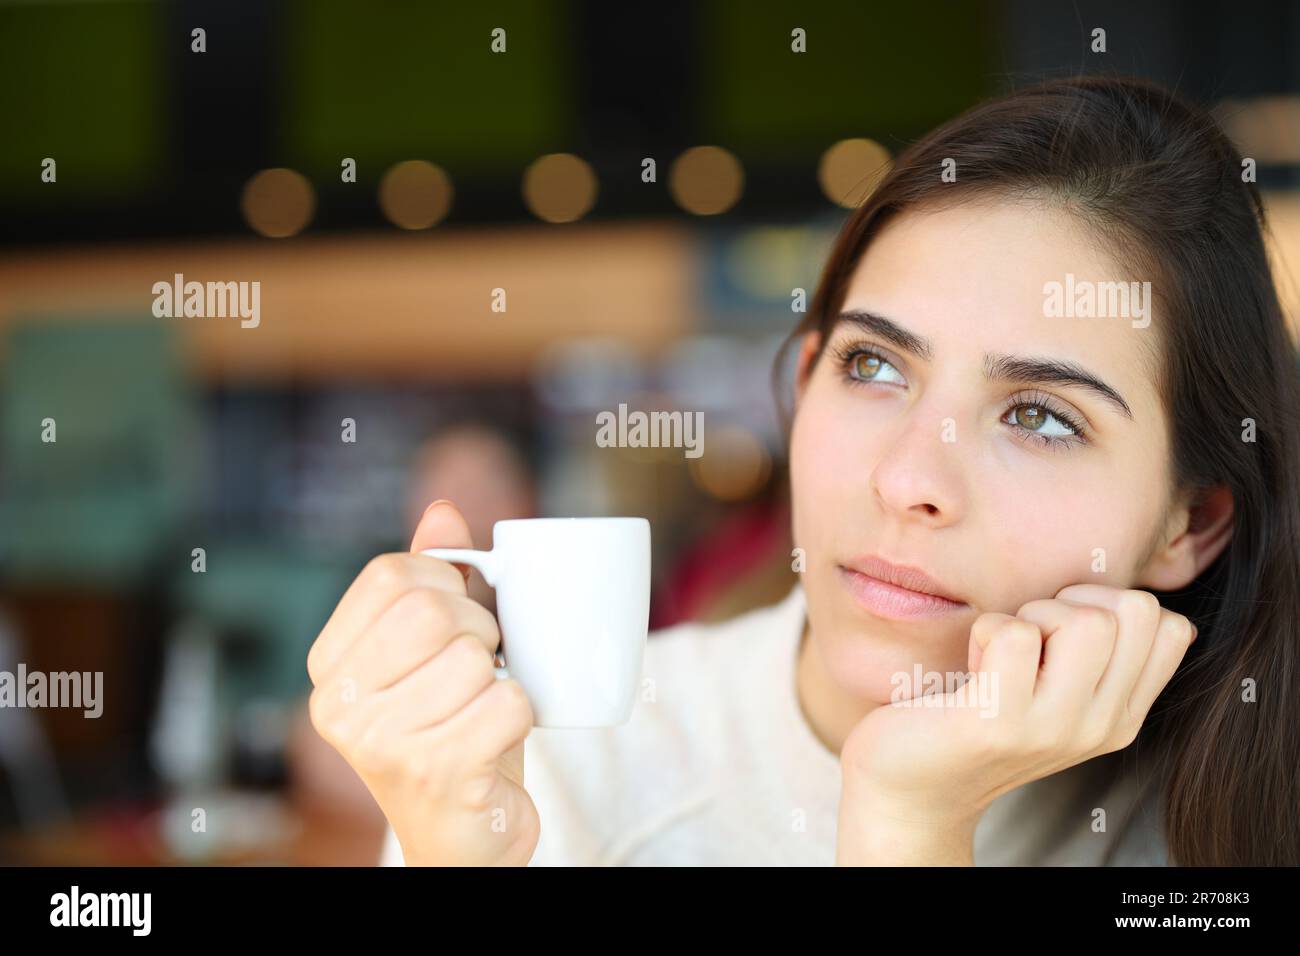 Pensive serious woman holding coffee cup in a bar interior Stock Photo